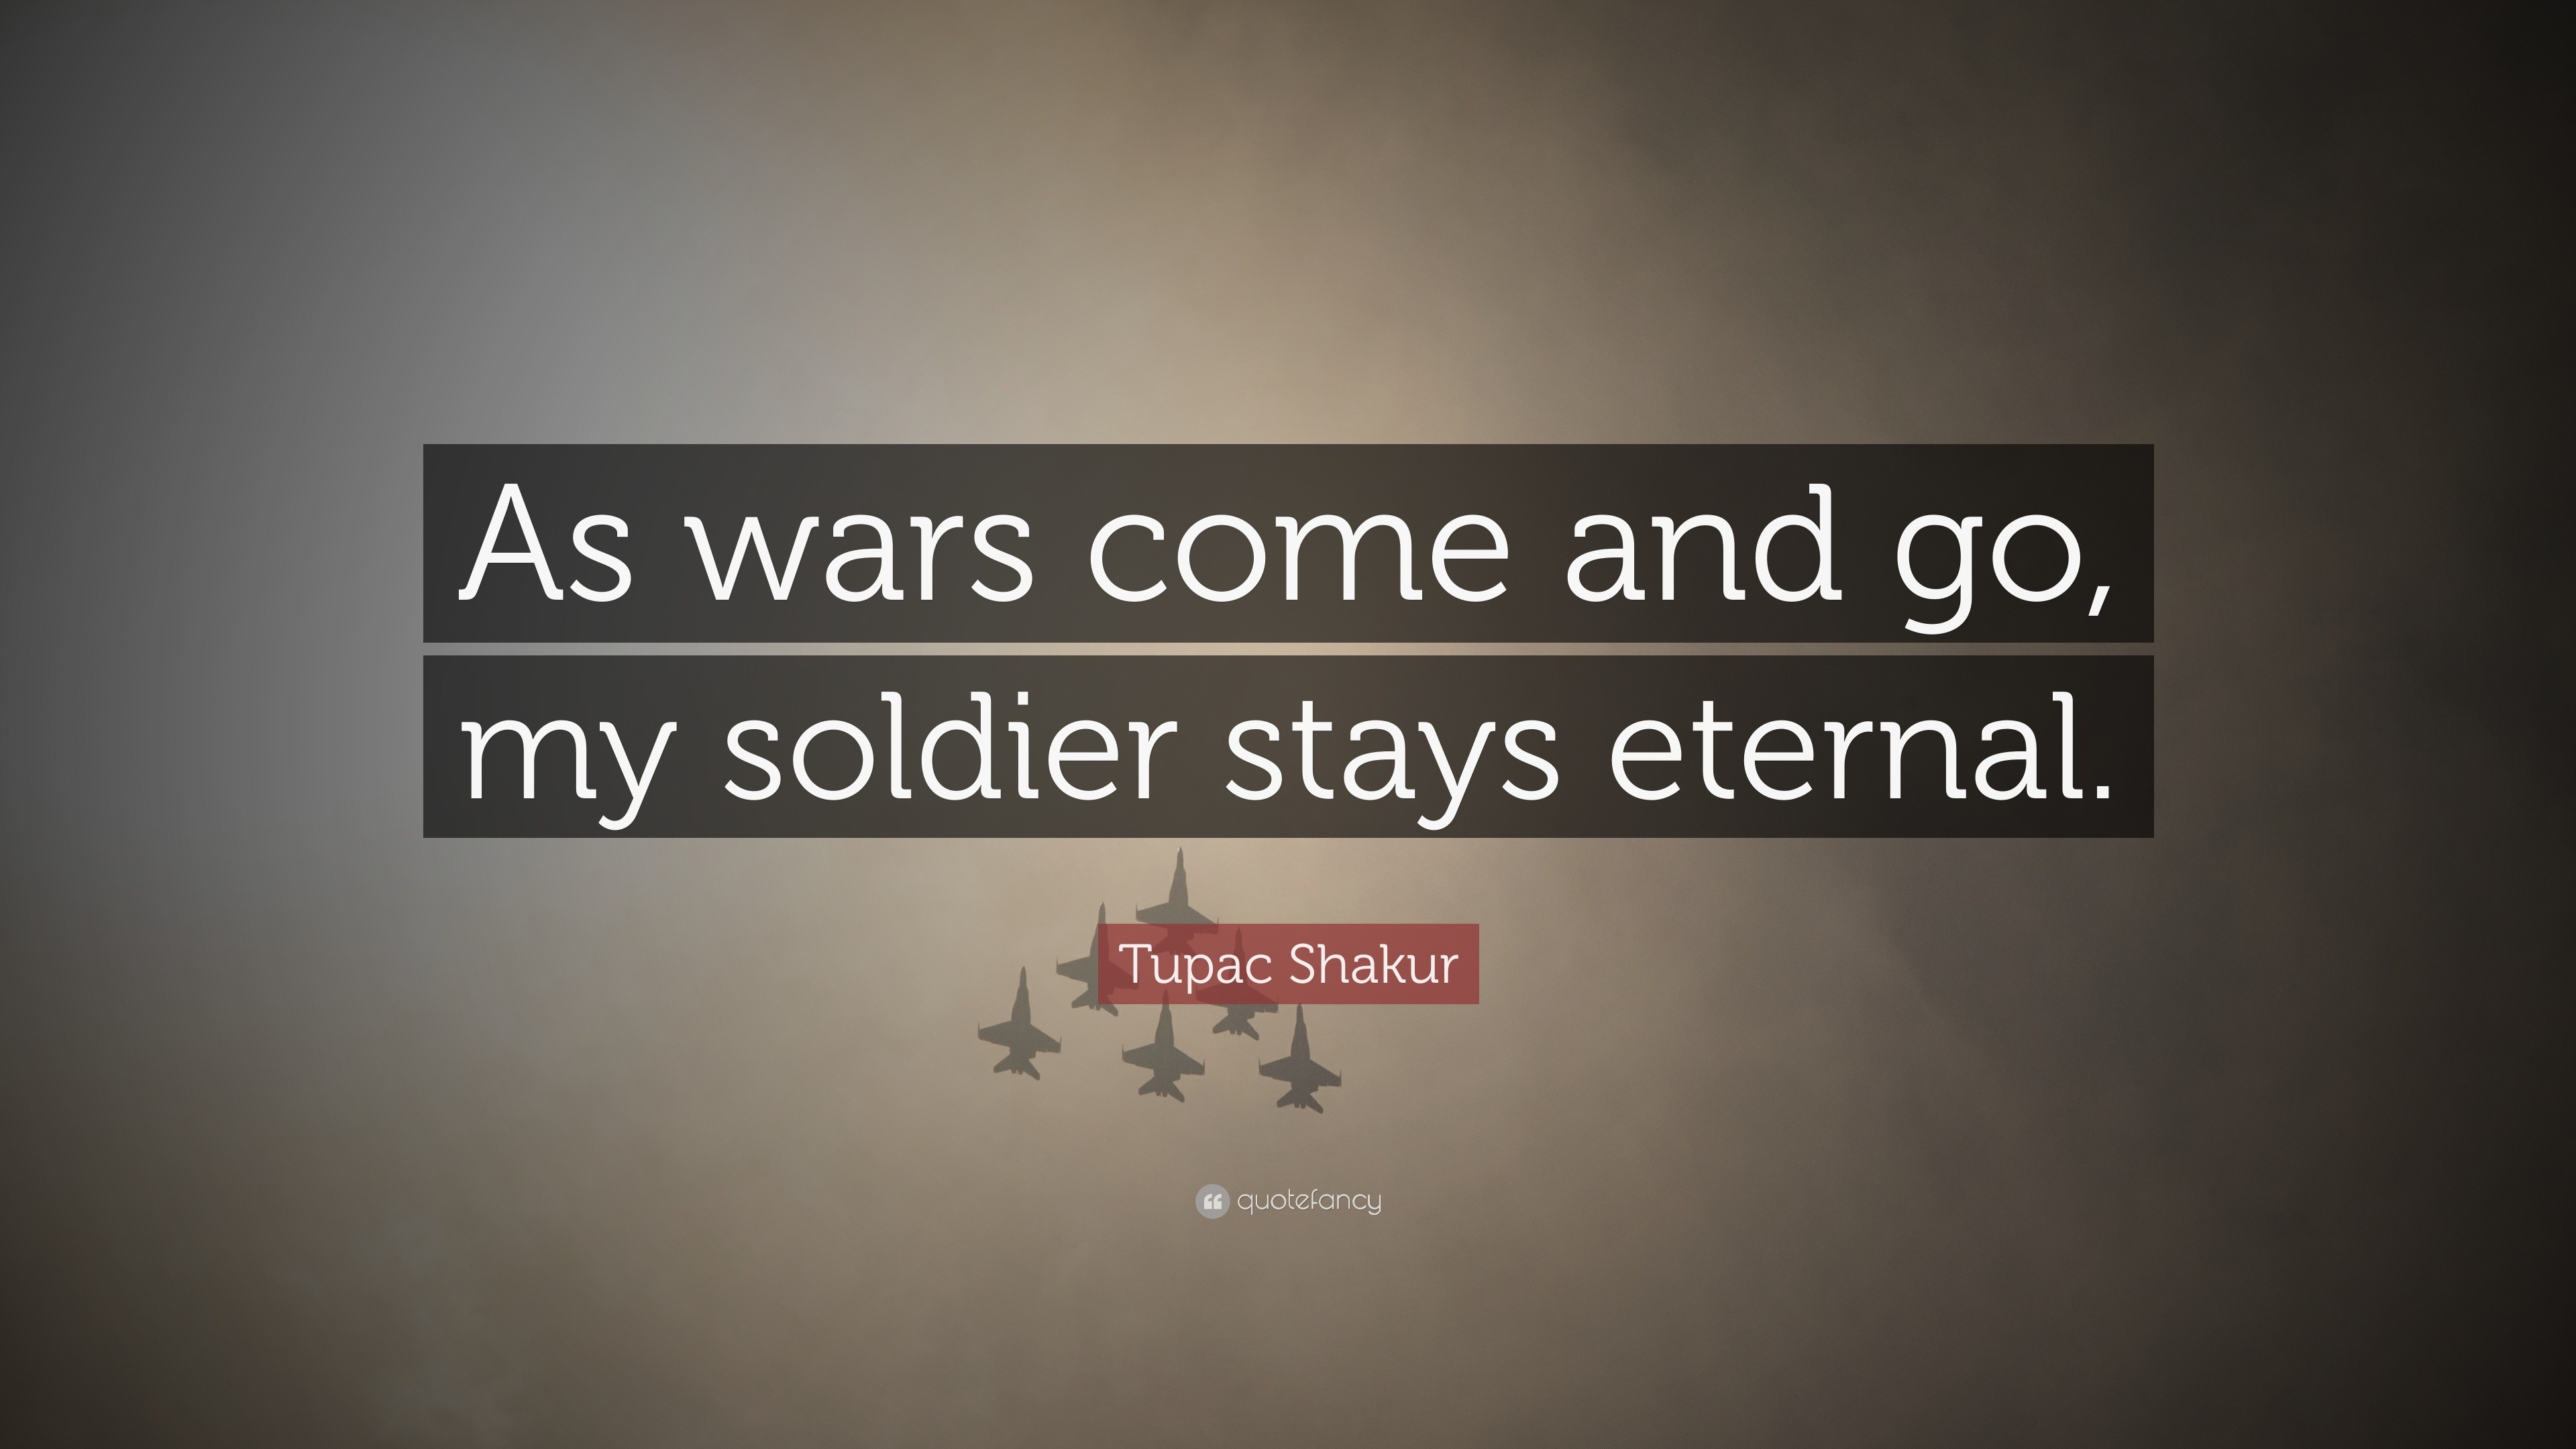 Tupac Shakur Quote “As wars e and go my sol r stays eternal